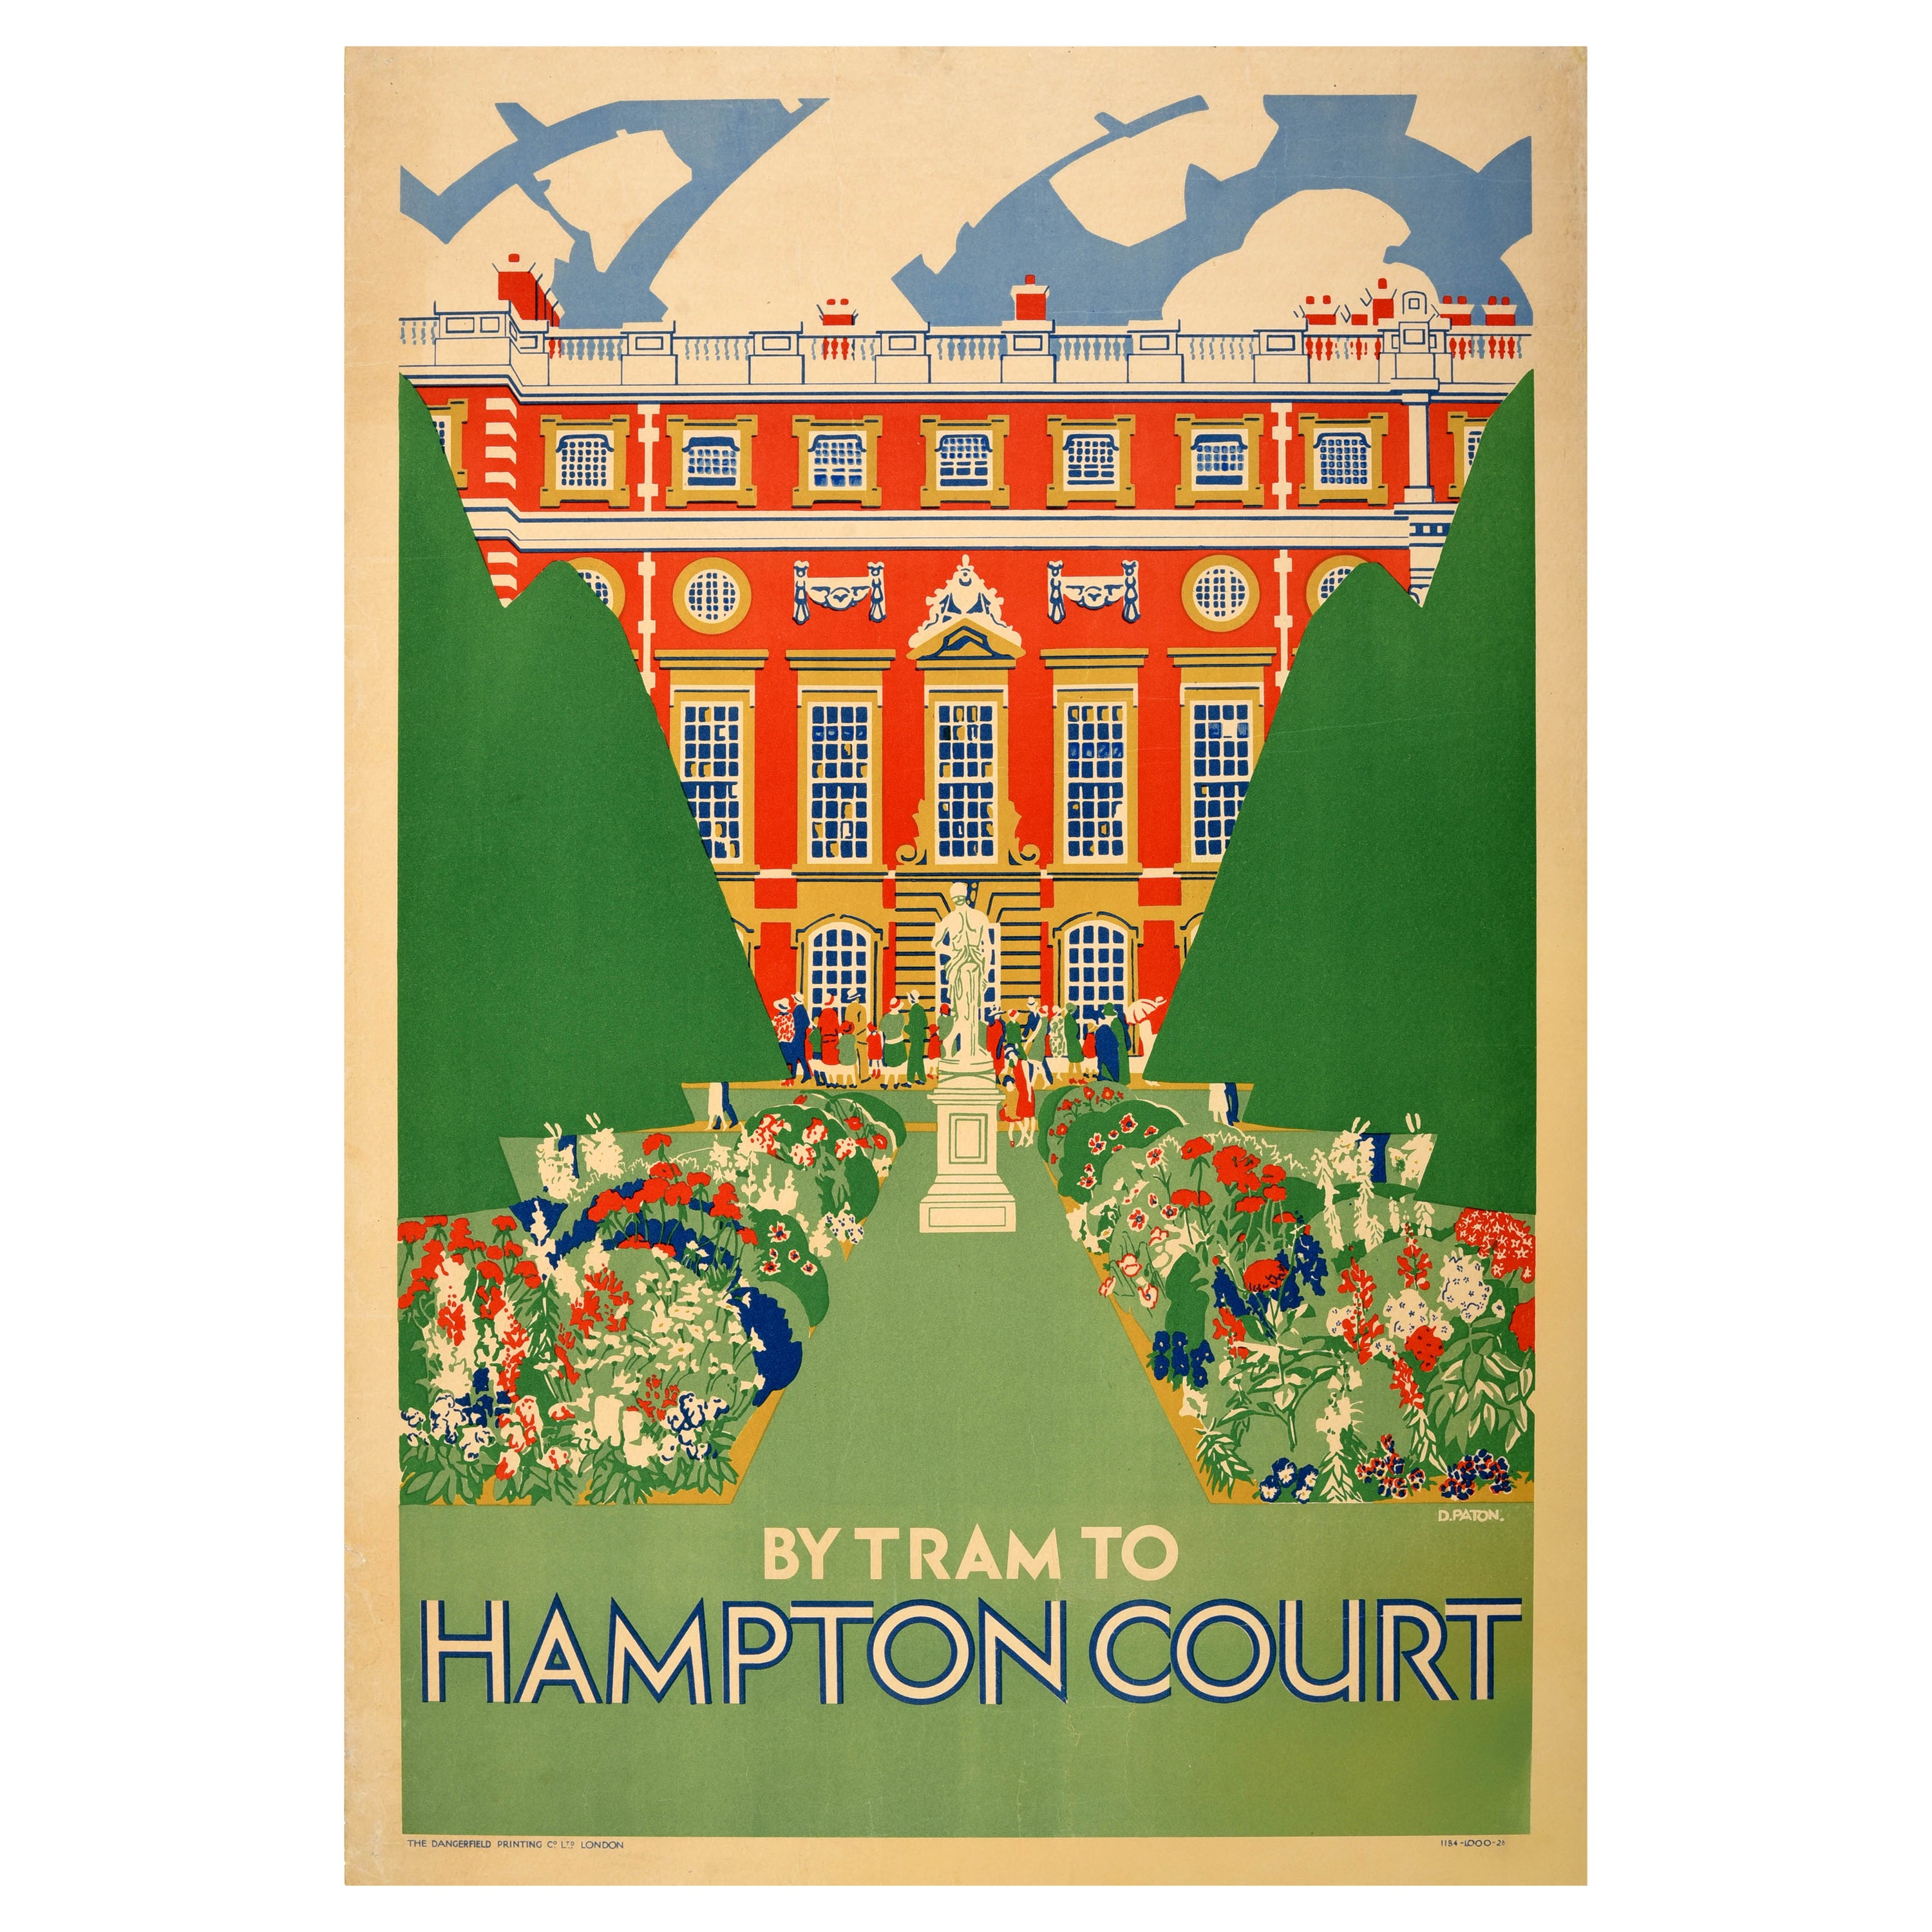 Original Vintage London Transport Poster By Tram To Hampton Court Royal Palace For Sale